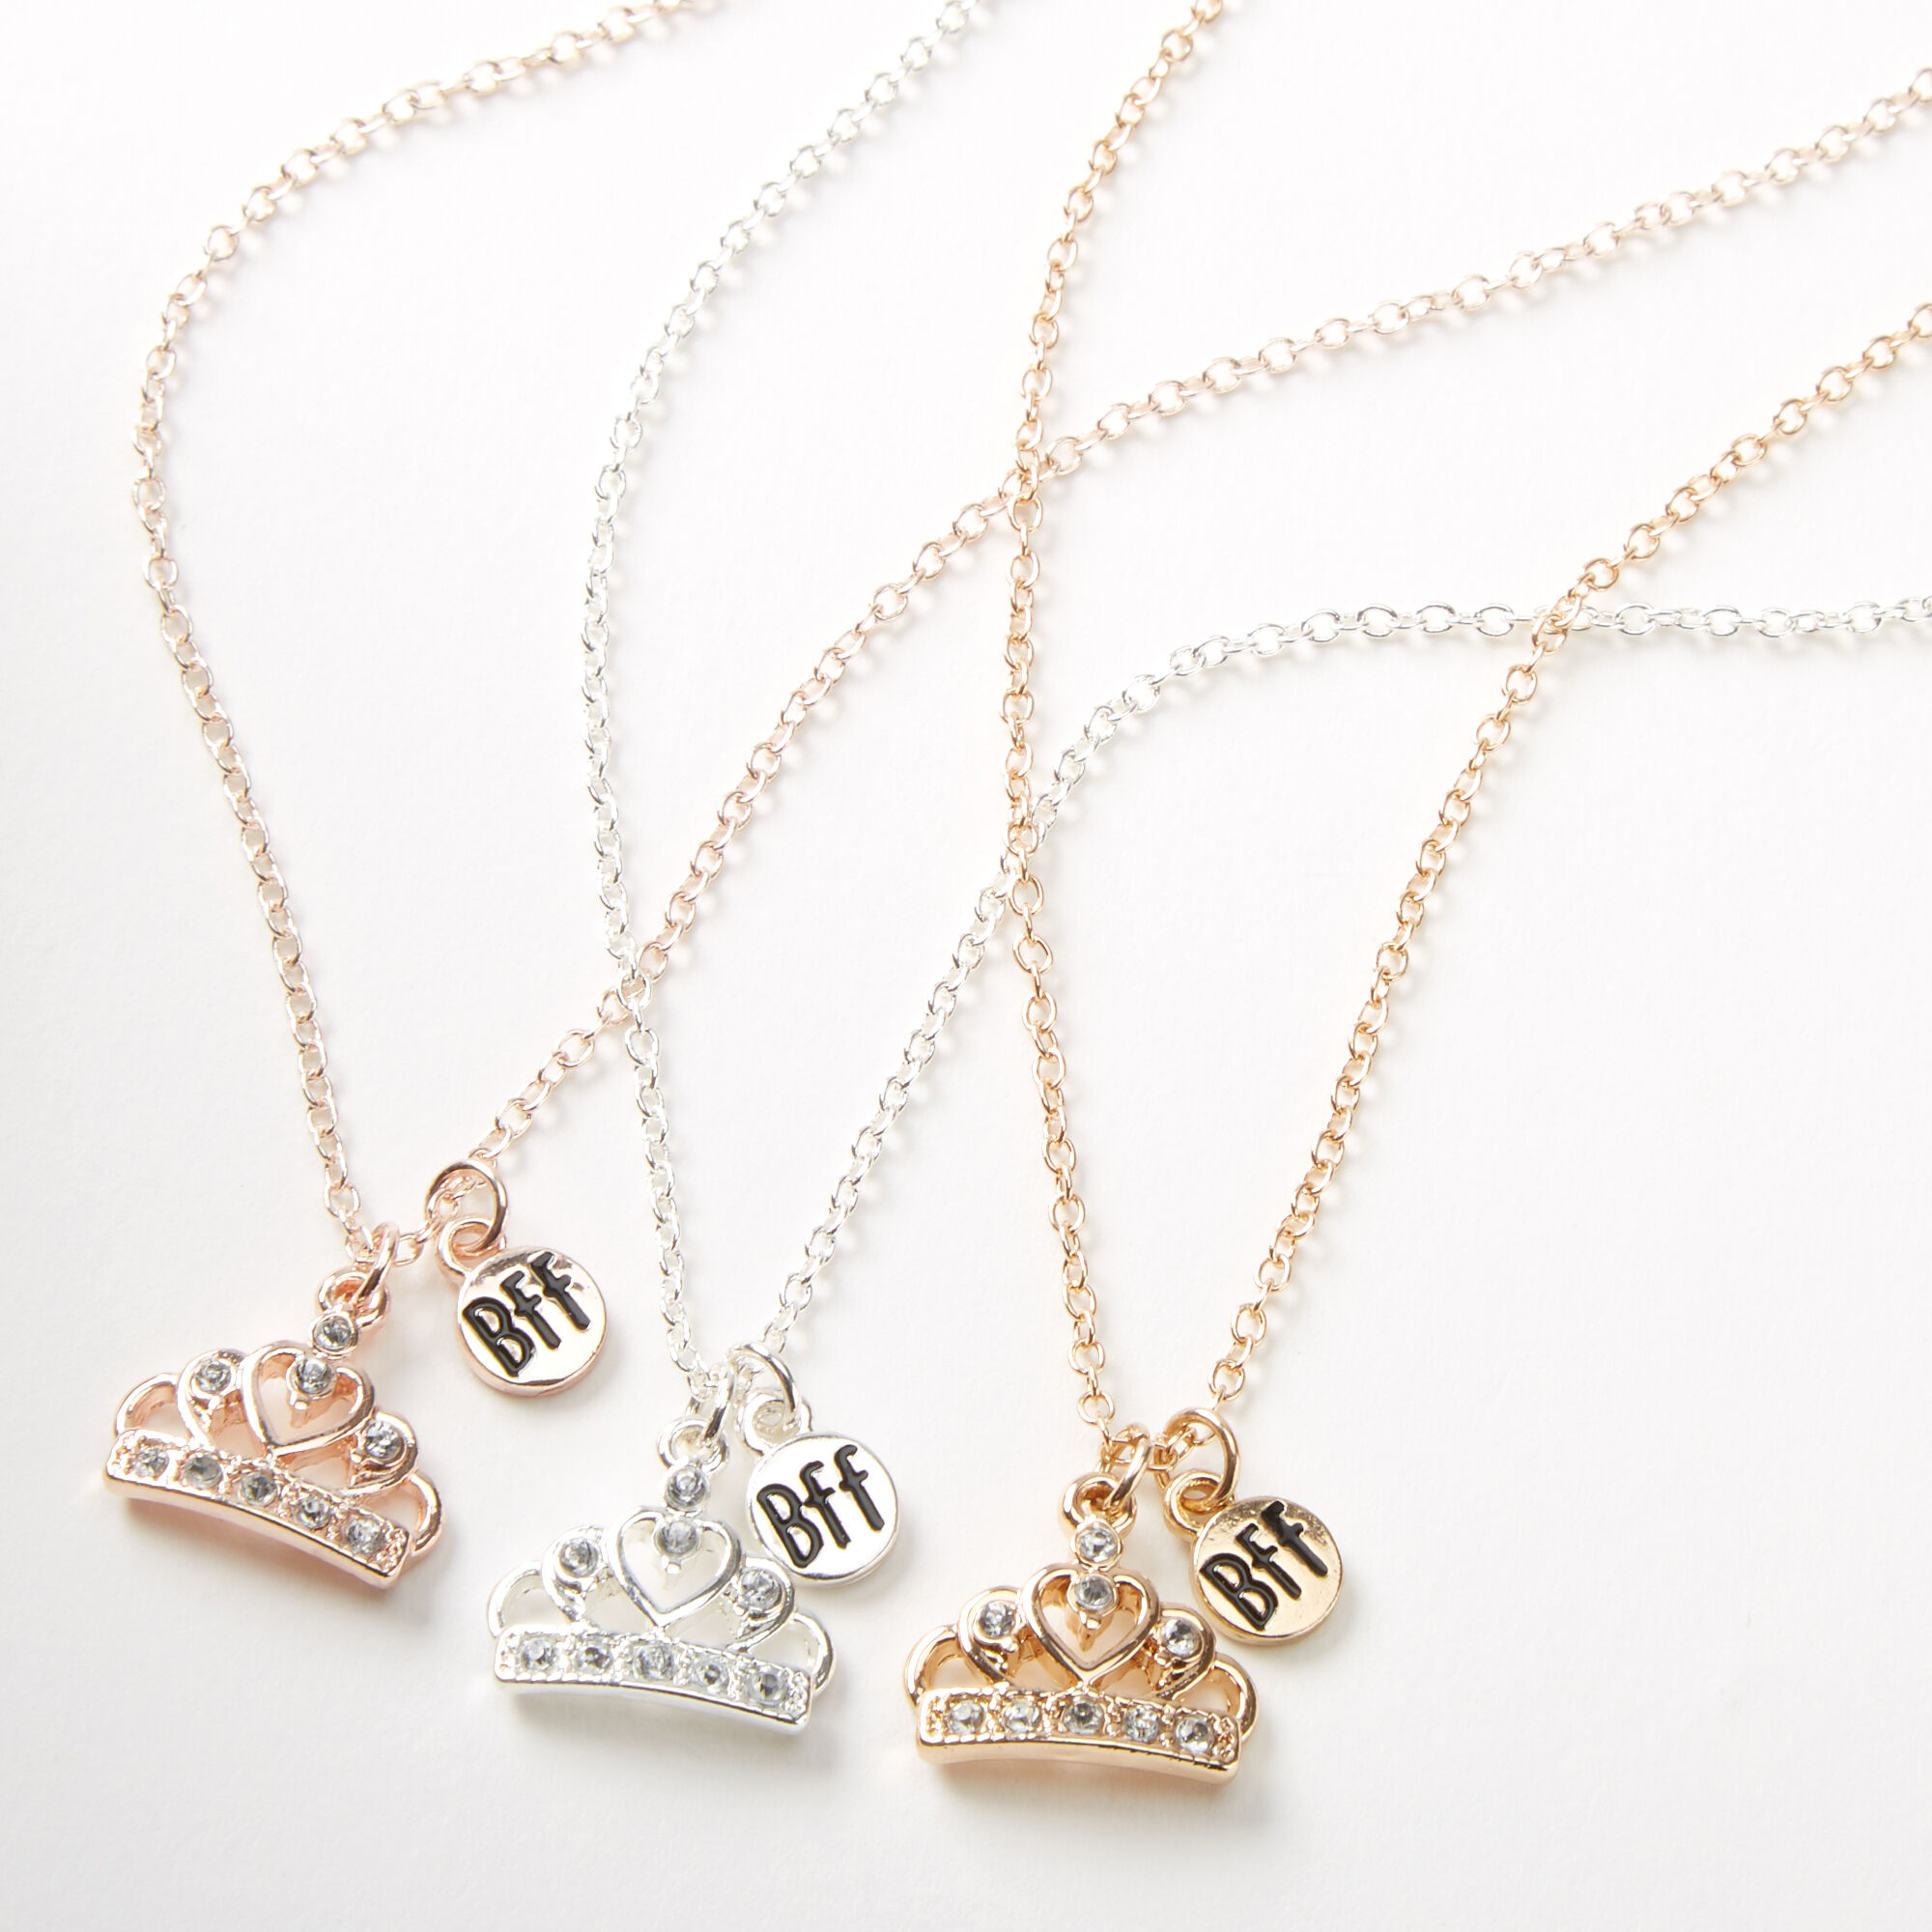 Heart Shaped Friendship Necklace 3 Pieces | Shop Today. Get it Tomorrow! |  takealot.com